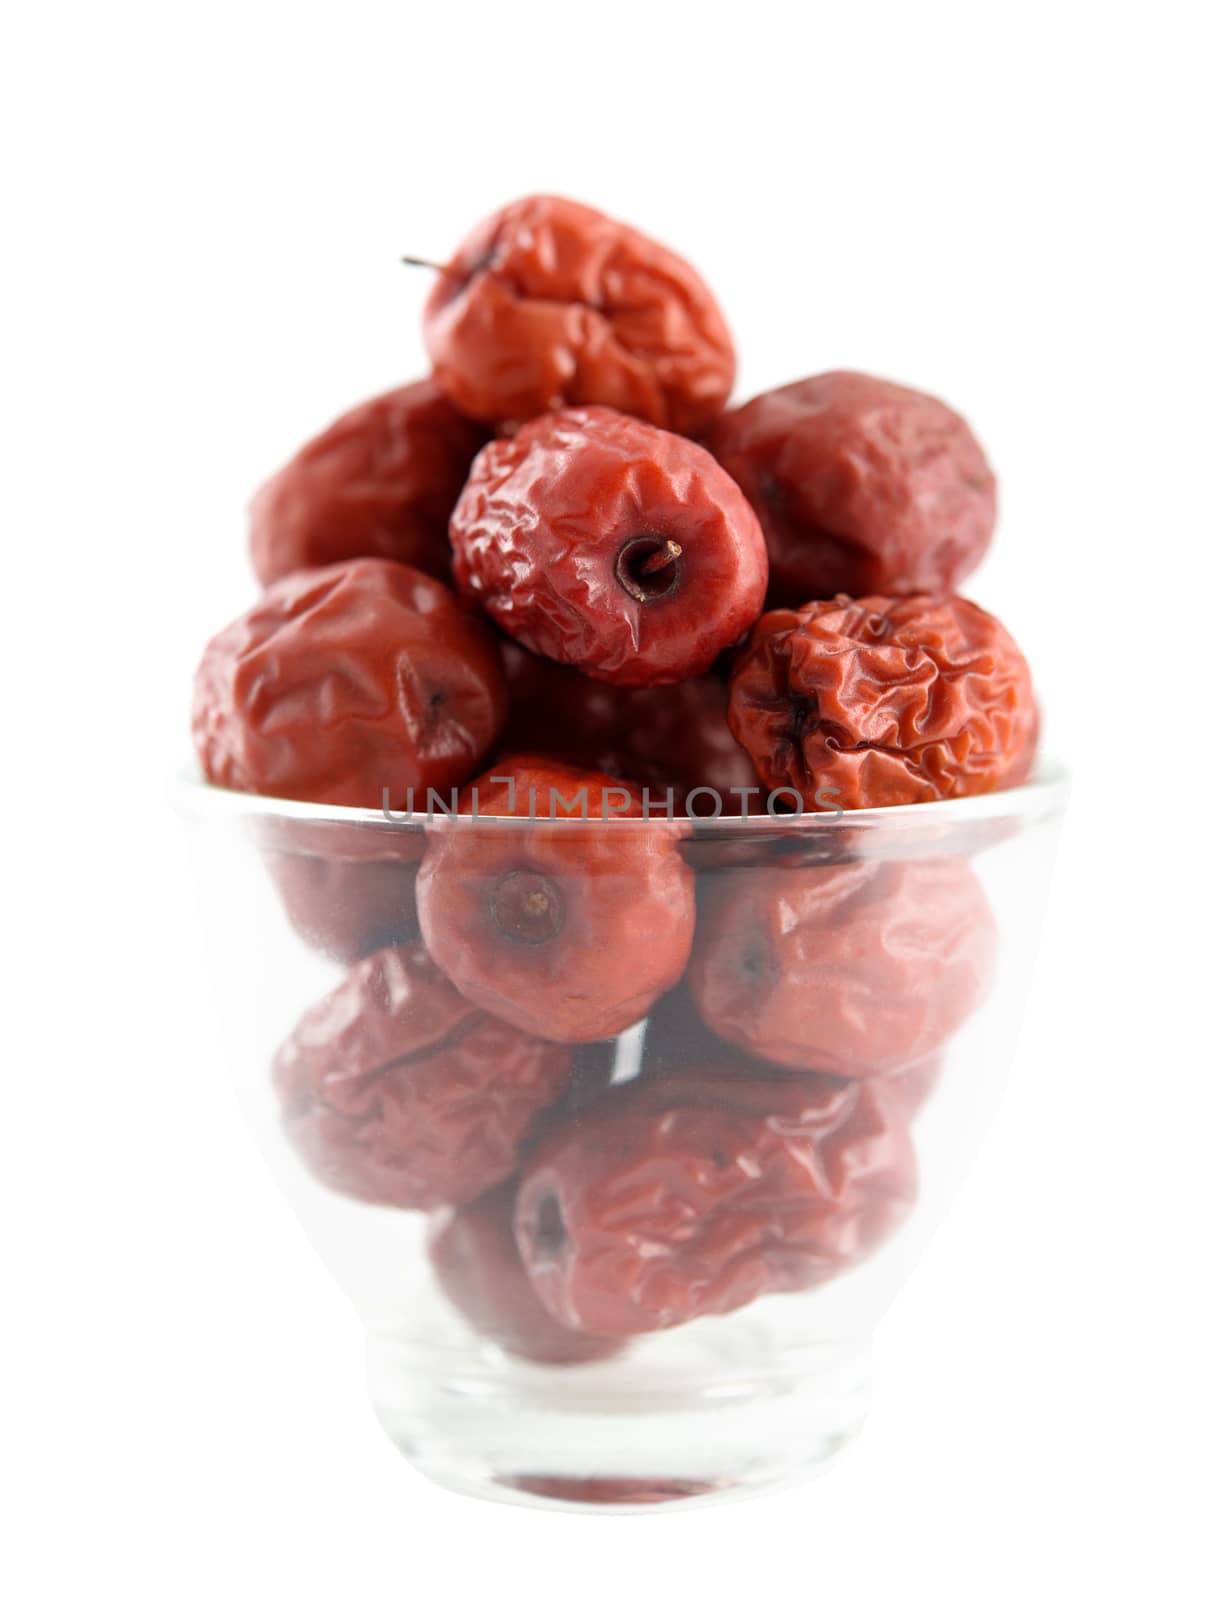 Dried red date or Chinese jujube by szefei